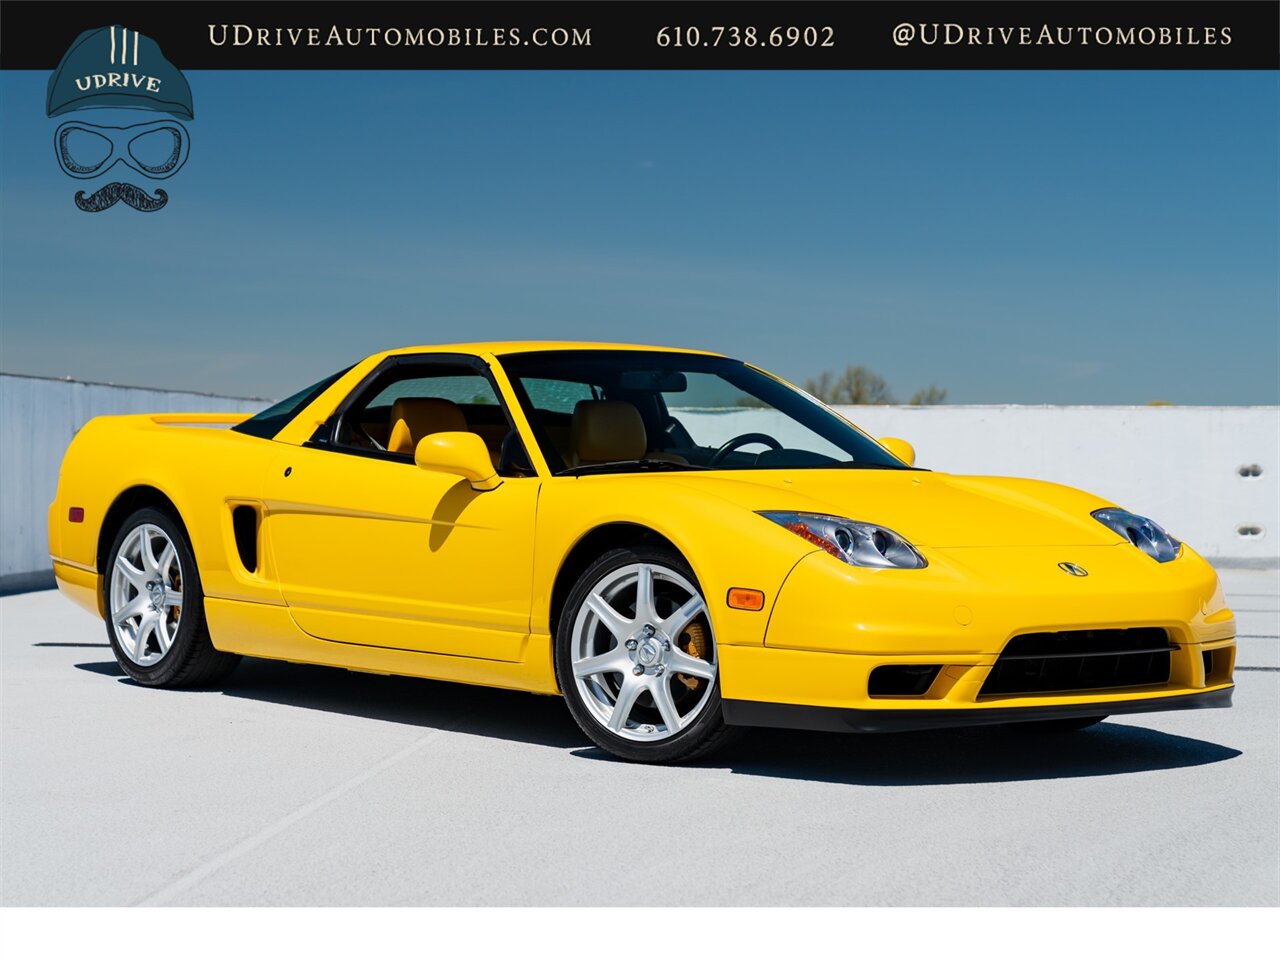 2003 Acura NSX NSX-T  Spa Yellow over Yellow Lthr 1 of 13 Produced - Photo 3 - West Chester, PA 19382